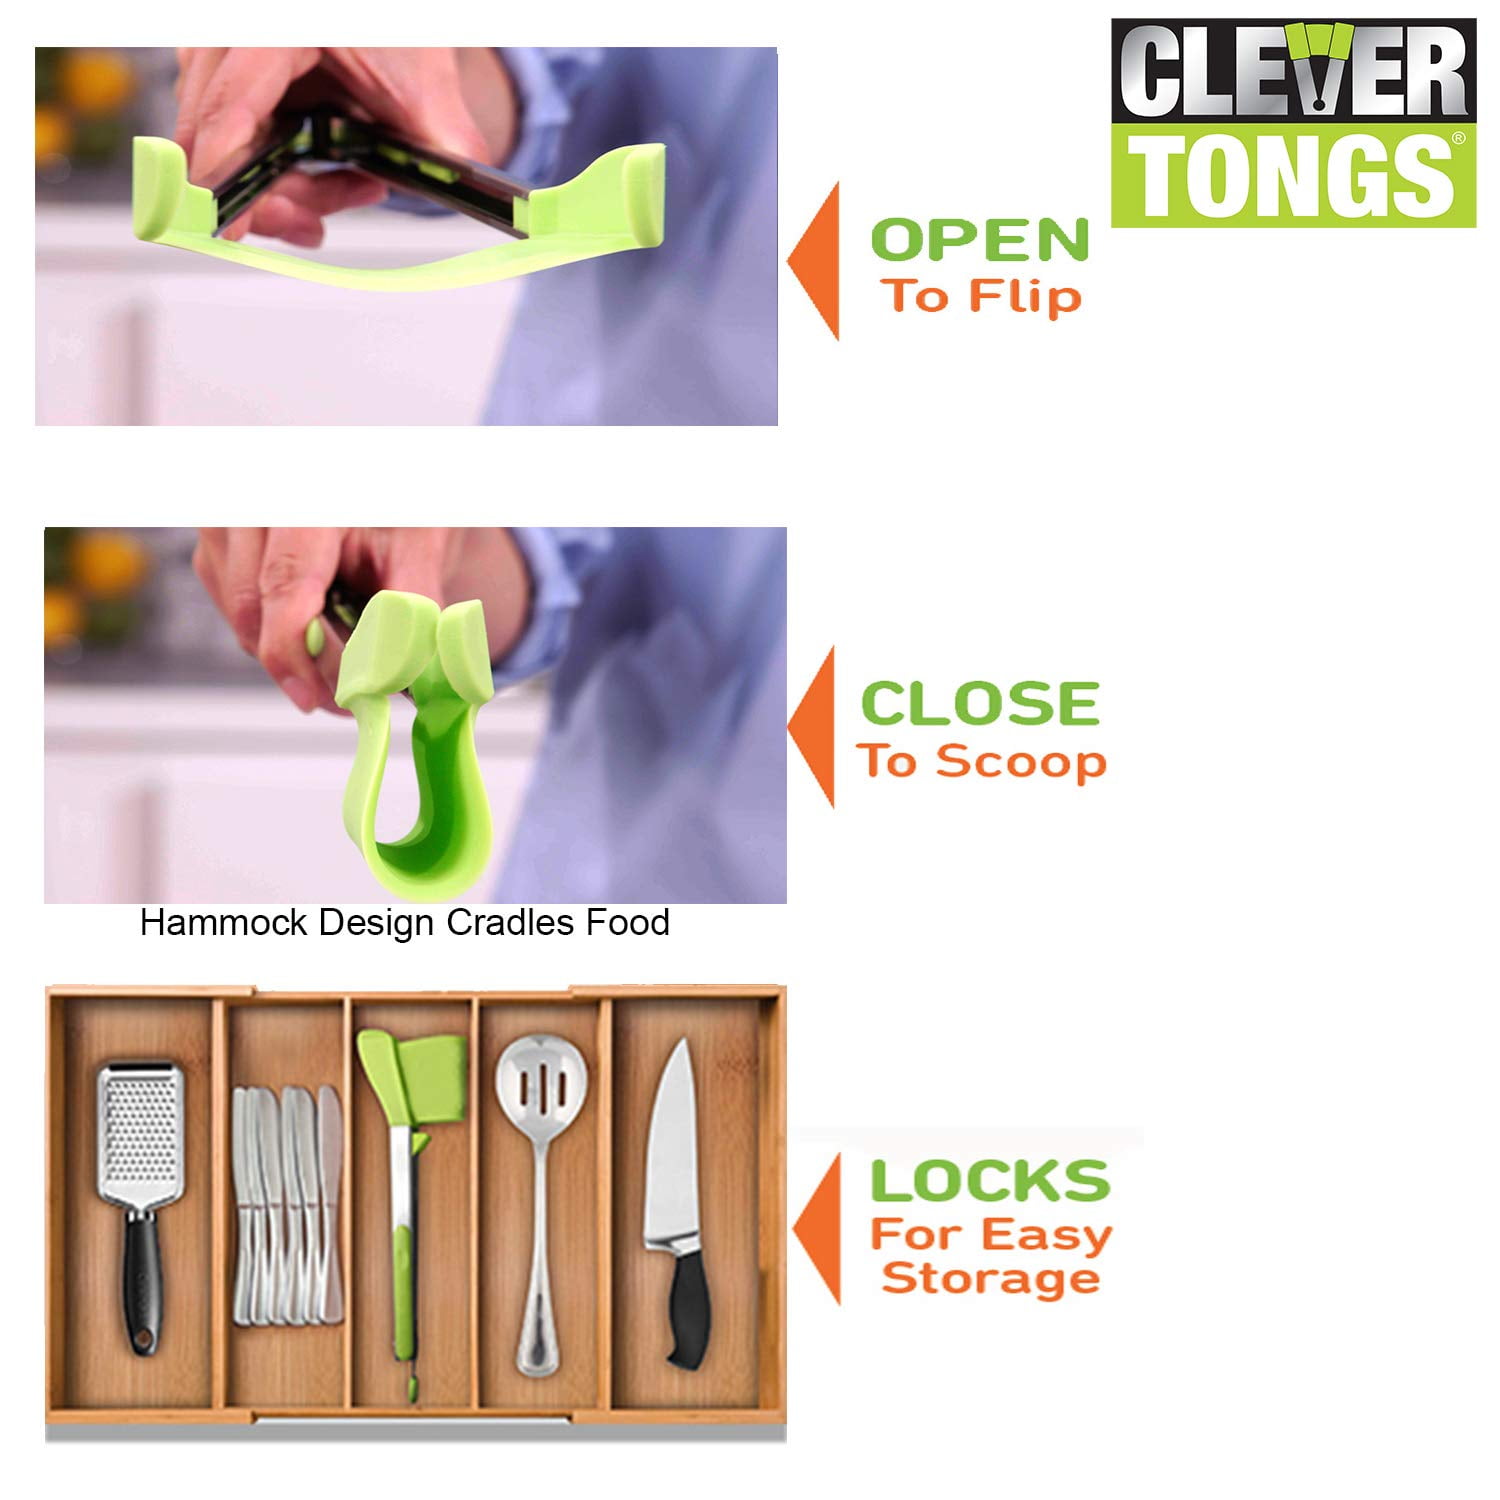 As Seen on TV Clever Tongs 2 in 1 Kitchen Spatula/Tongs, 4 Pack